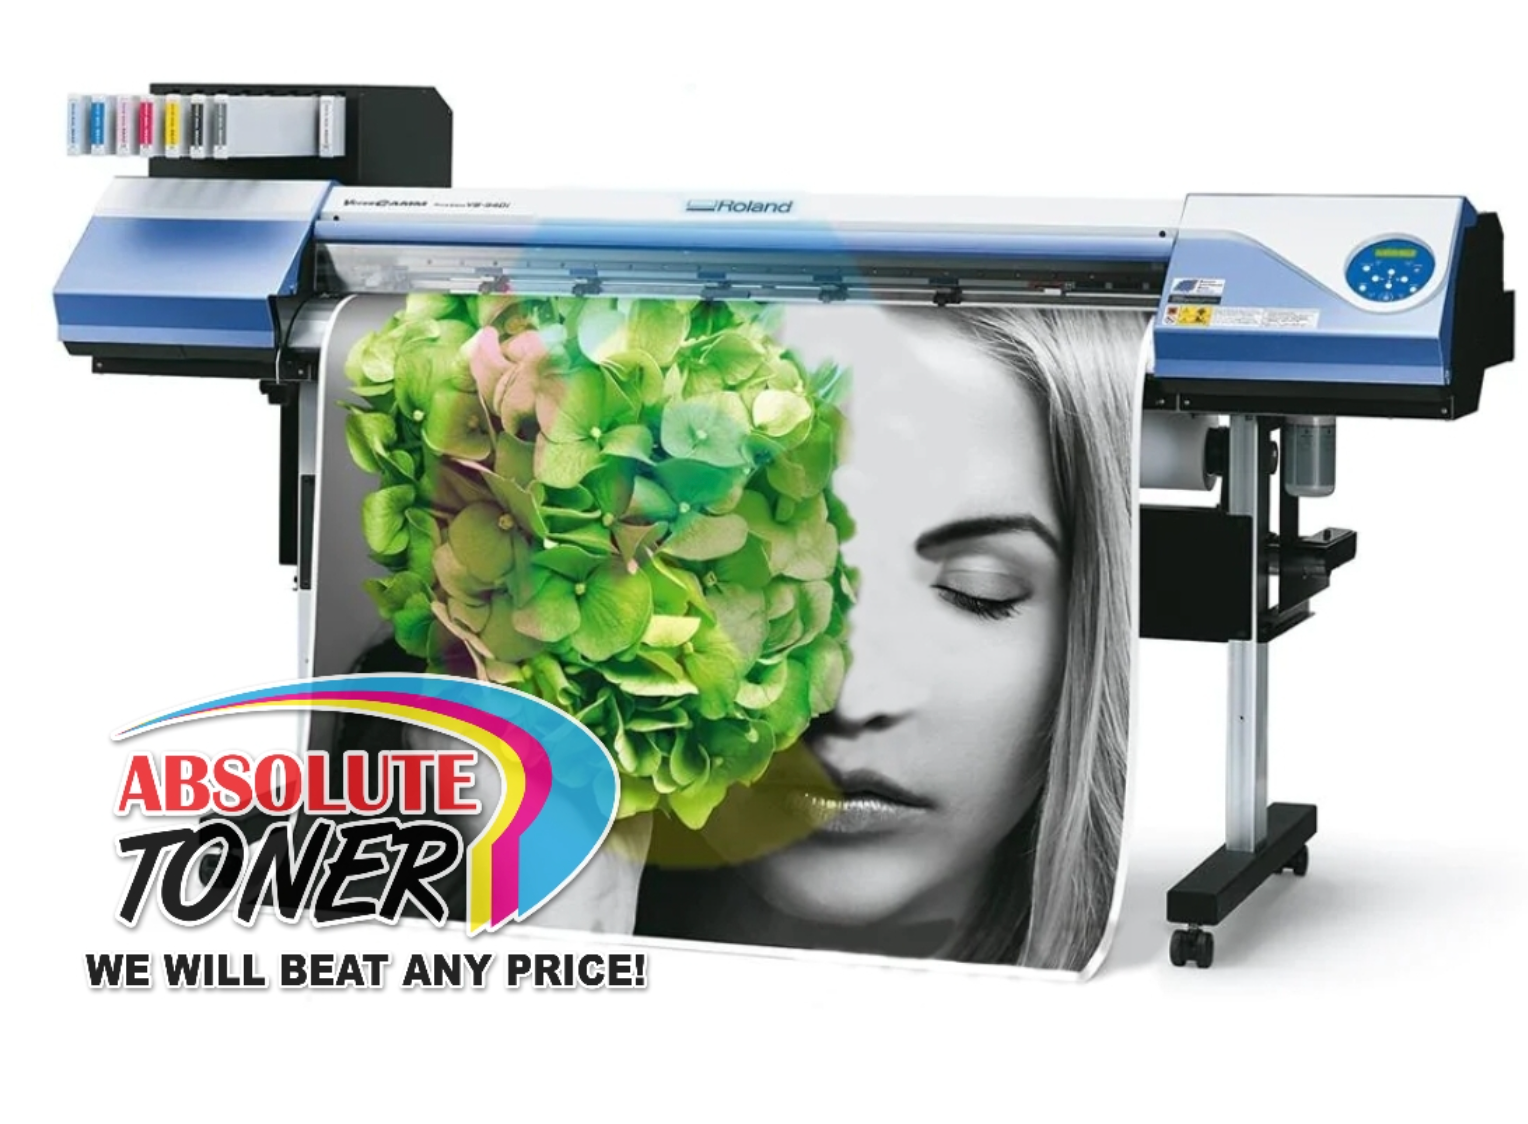 Absolute Toner $195/Month NEW HEAD Roland VersaCAMM 30" VS-300i (VS300i) Large Format Inkjet Printer/Cutter (Print And Cut) With Stand Print and Cut Plotters